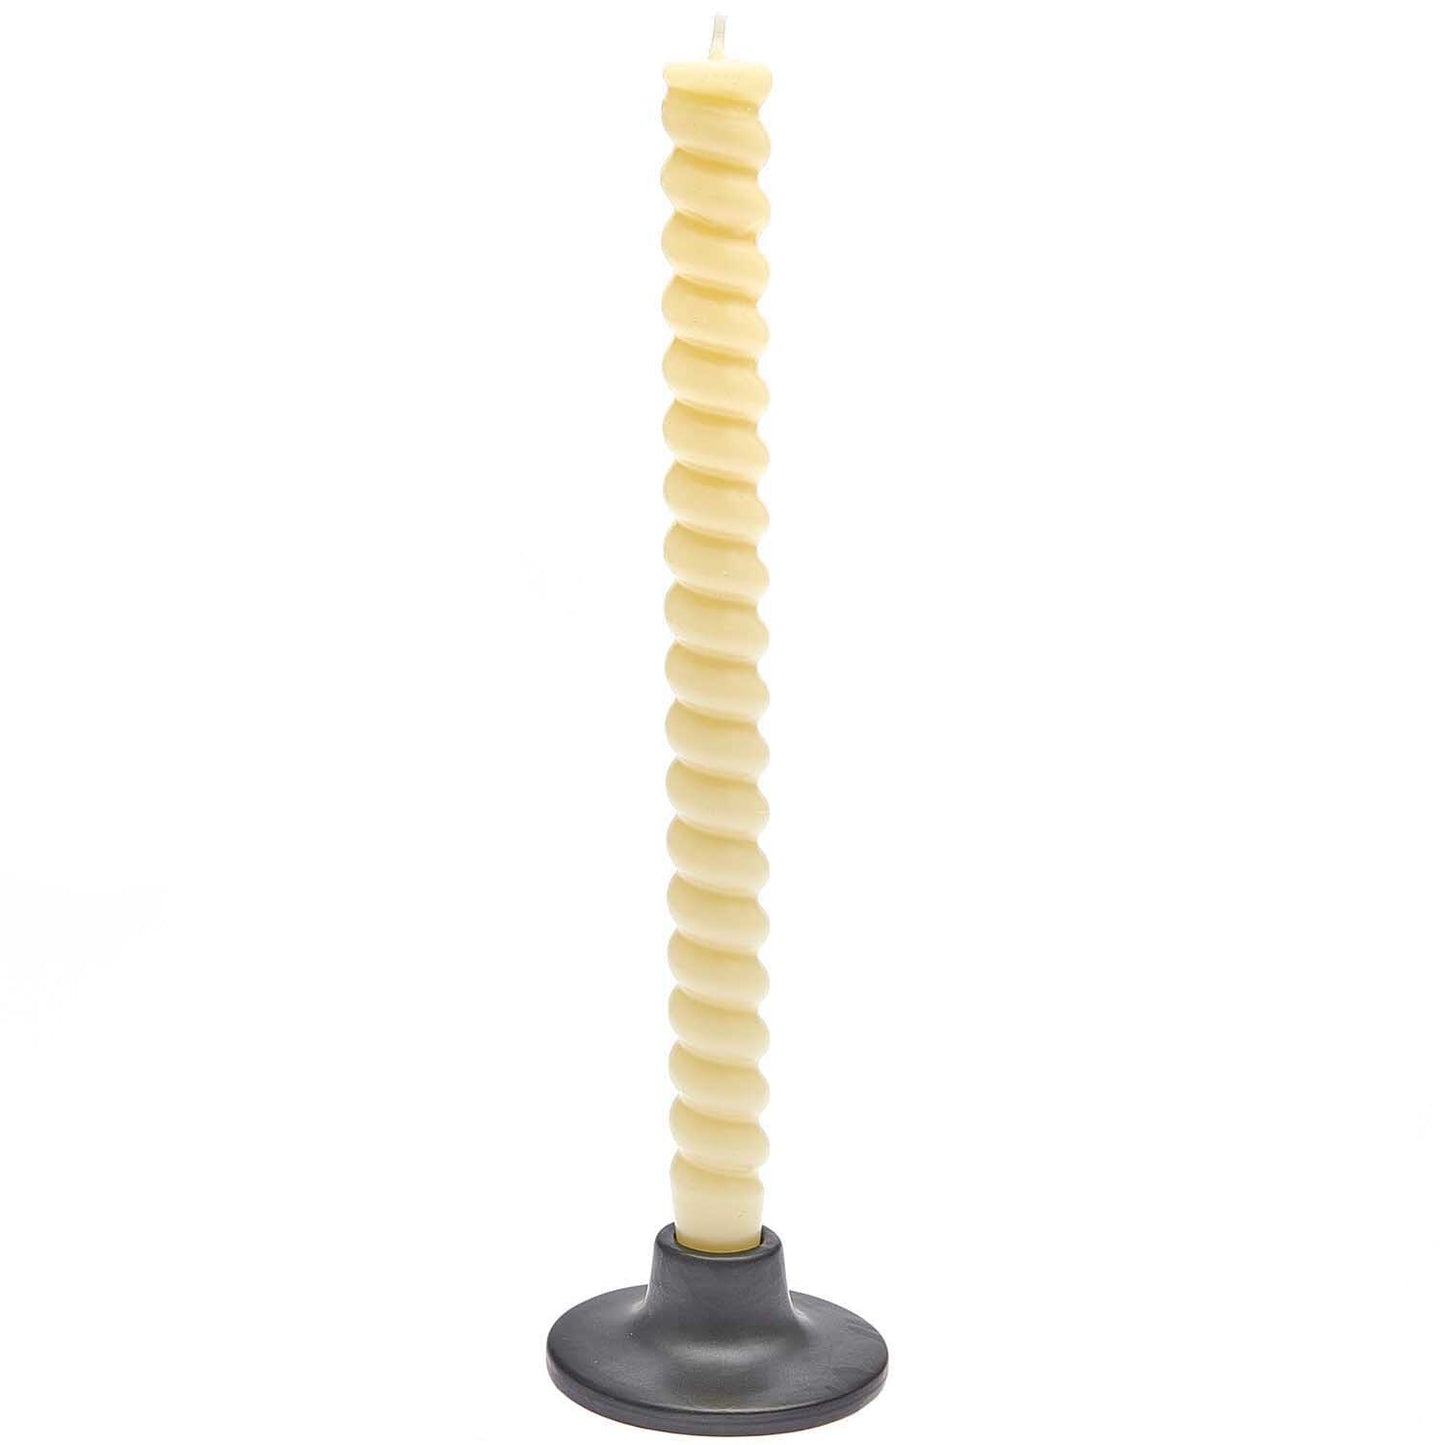 RICO Spiral Candle 28 cm in sorbet yellow